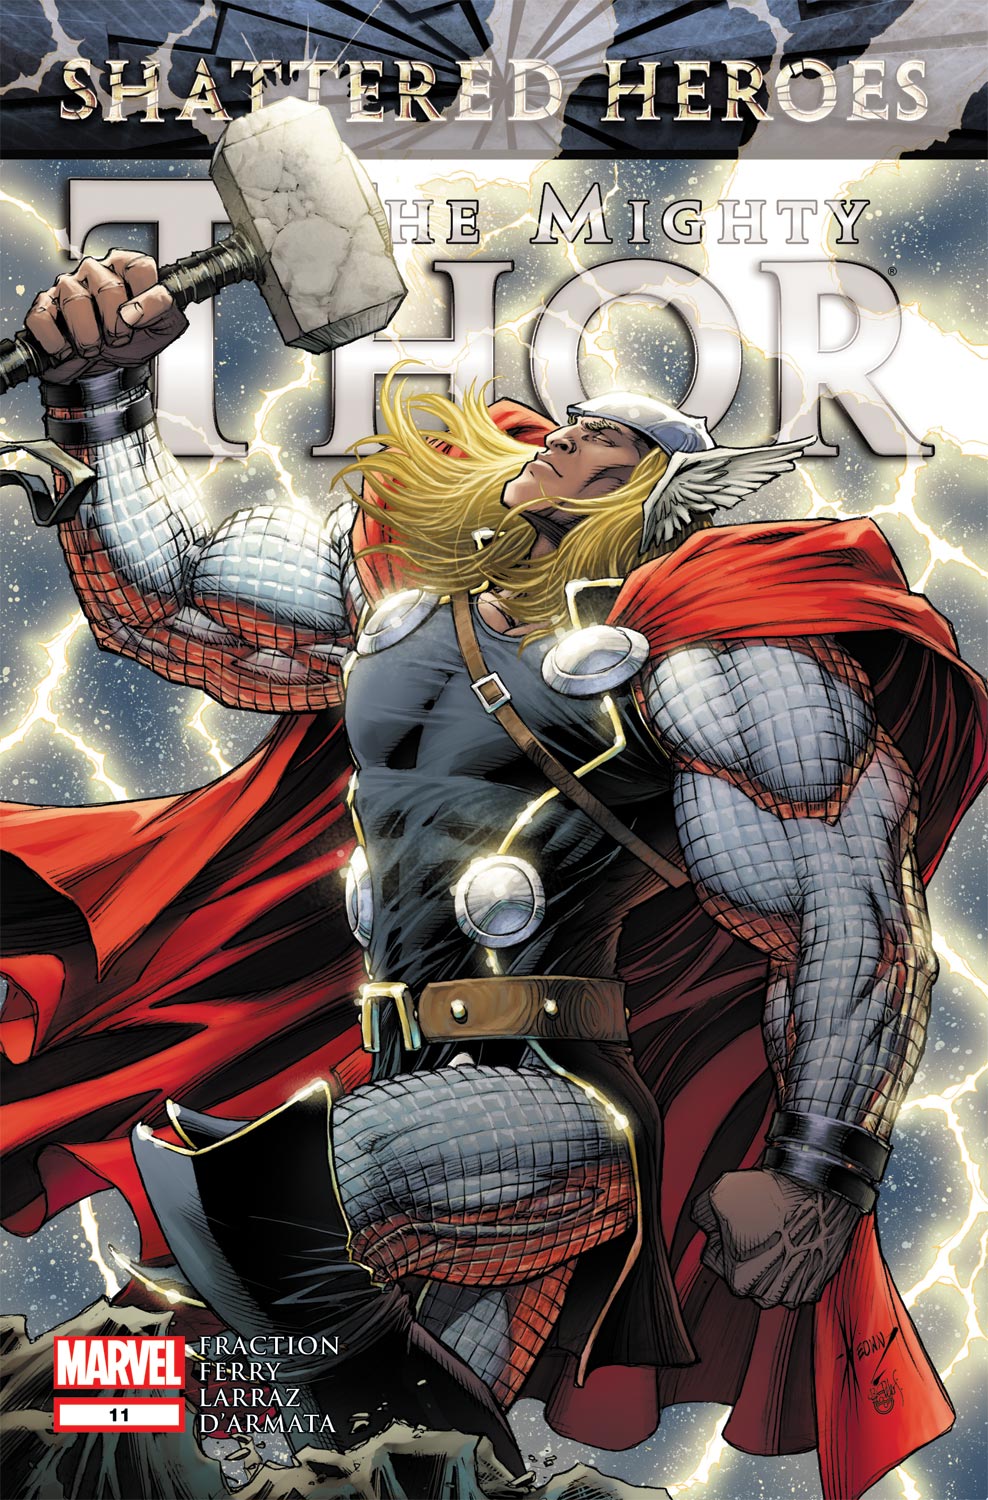 The Mighty Thor (2011) #11